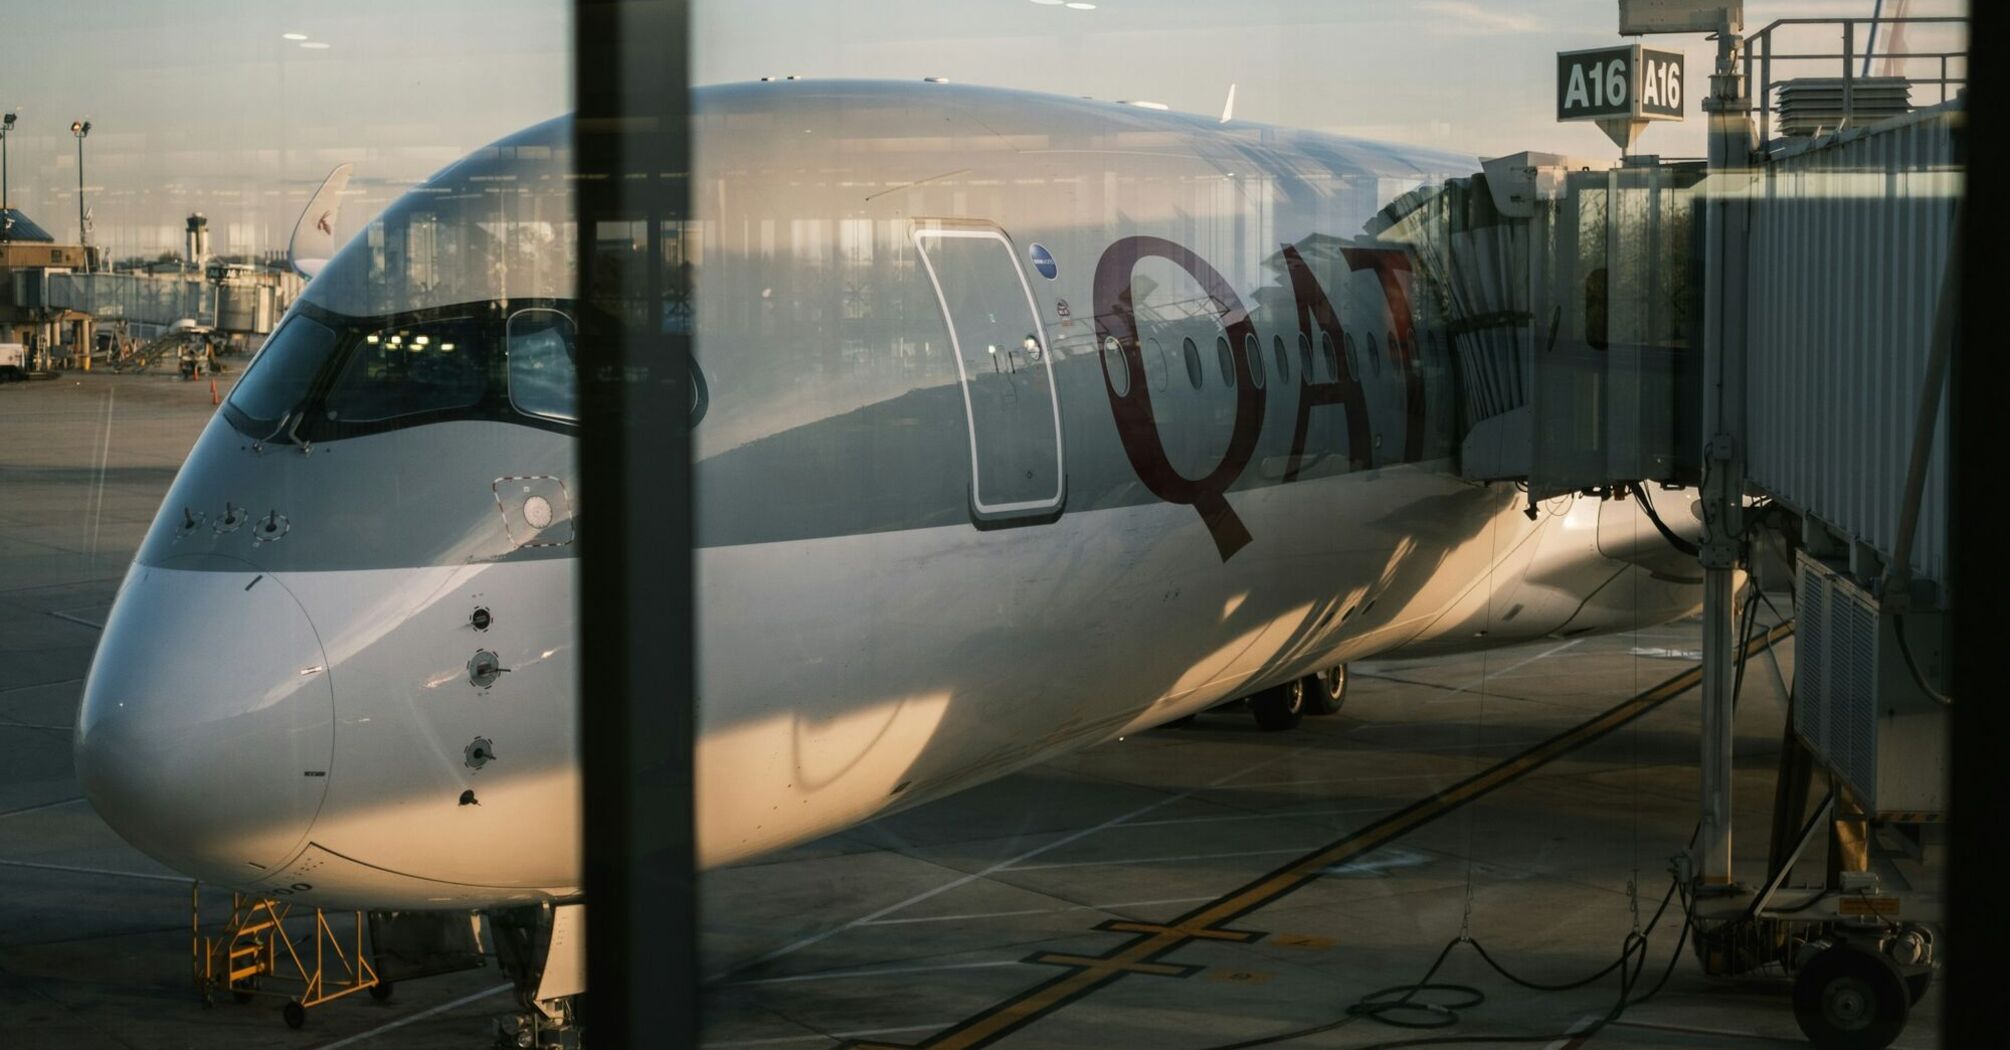 Qatar Airlines plane at the gate in Philadelphia